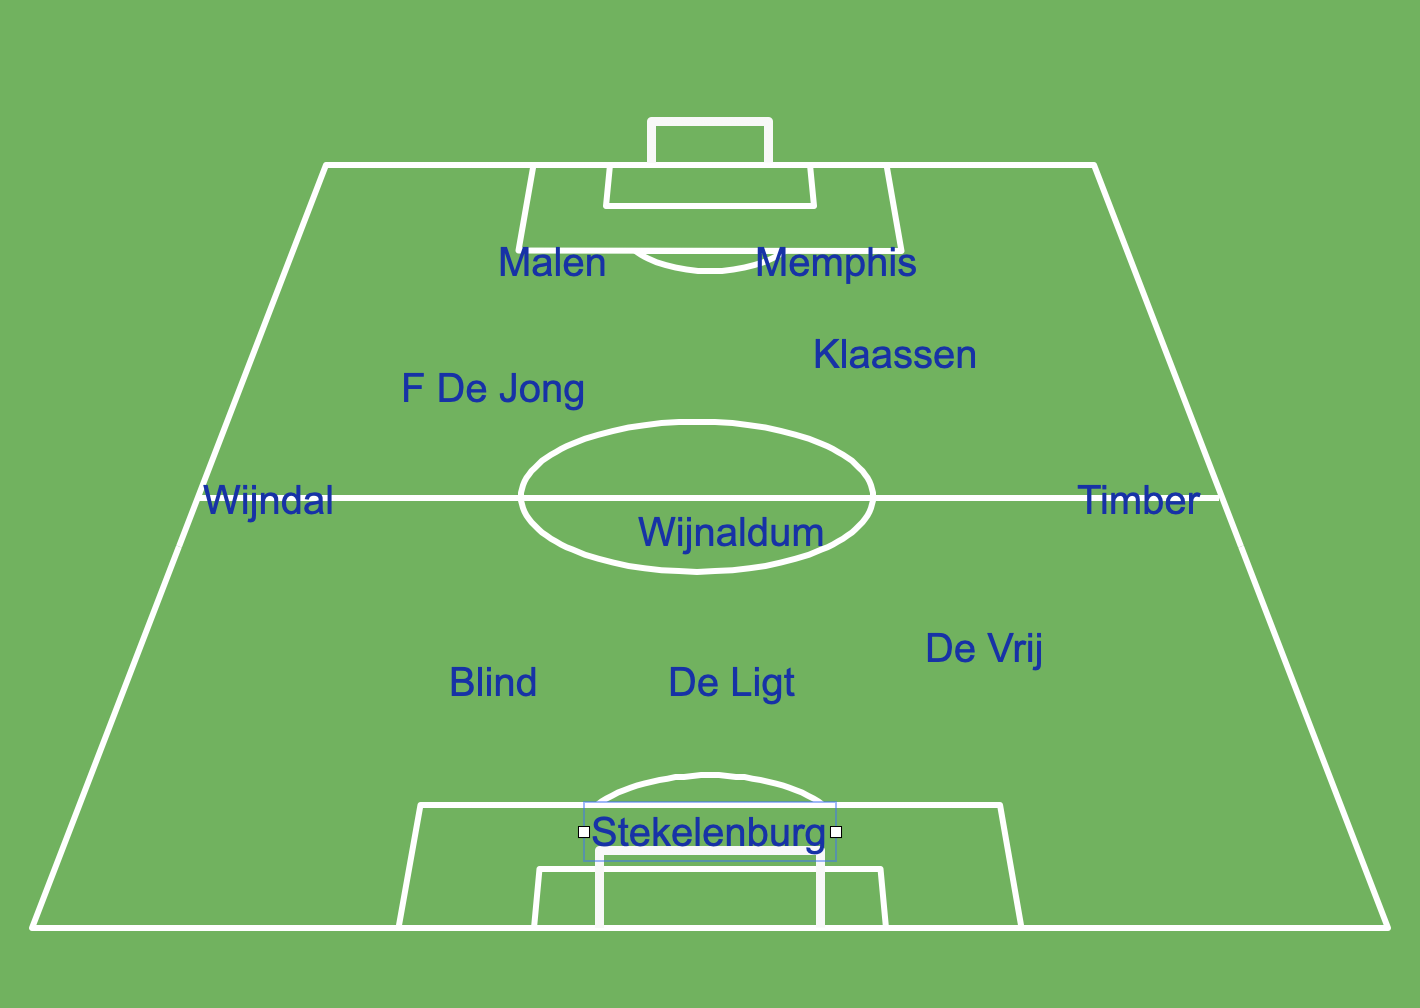 Experts on the 5-3-2 Dutch Soccer / Football site